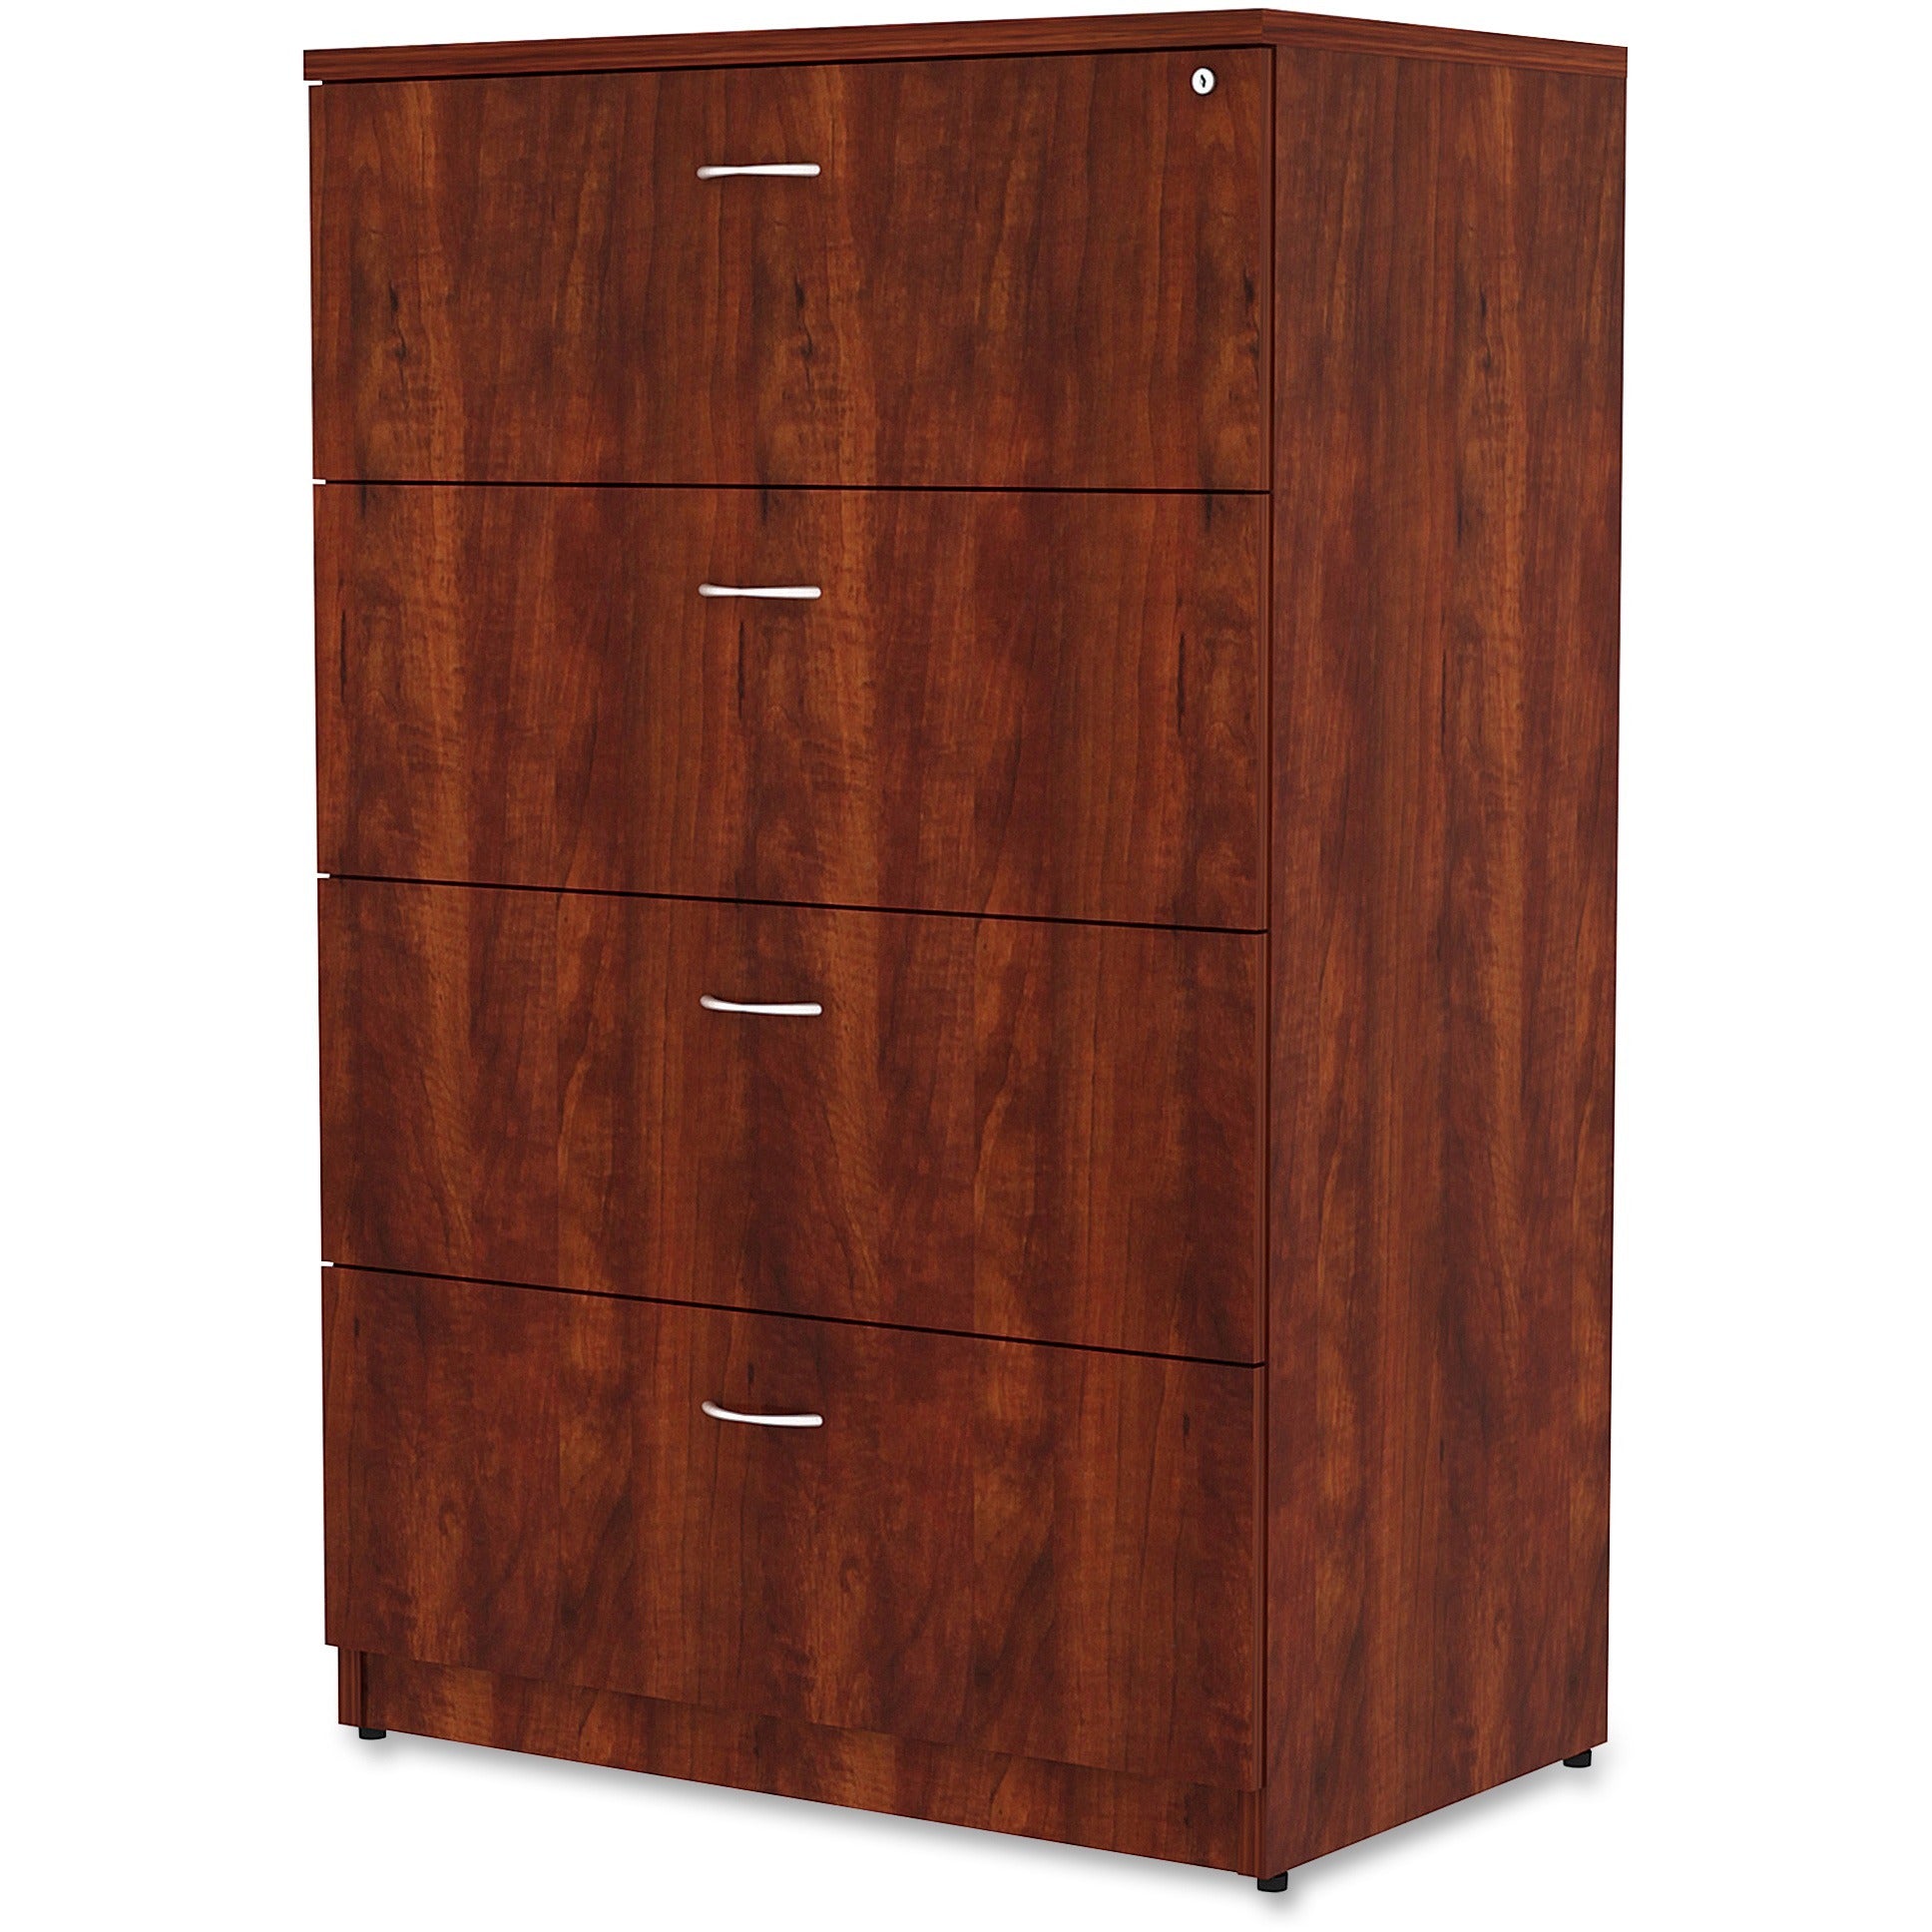 lorell-essentials-series-4-drawer-lateral-file-1-top-355-x-22548--01-edge-4-x-file-drawers-finish-cherry-laminate_llr34387 - 3